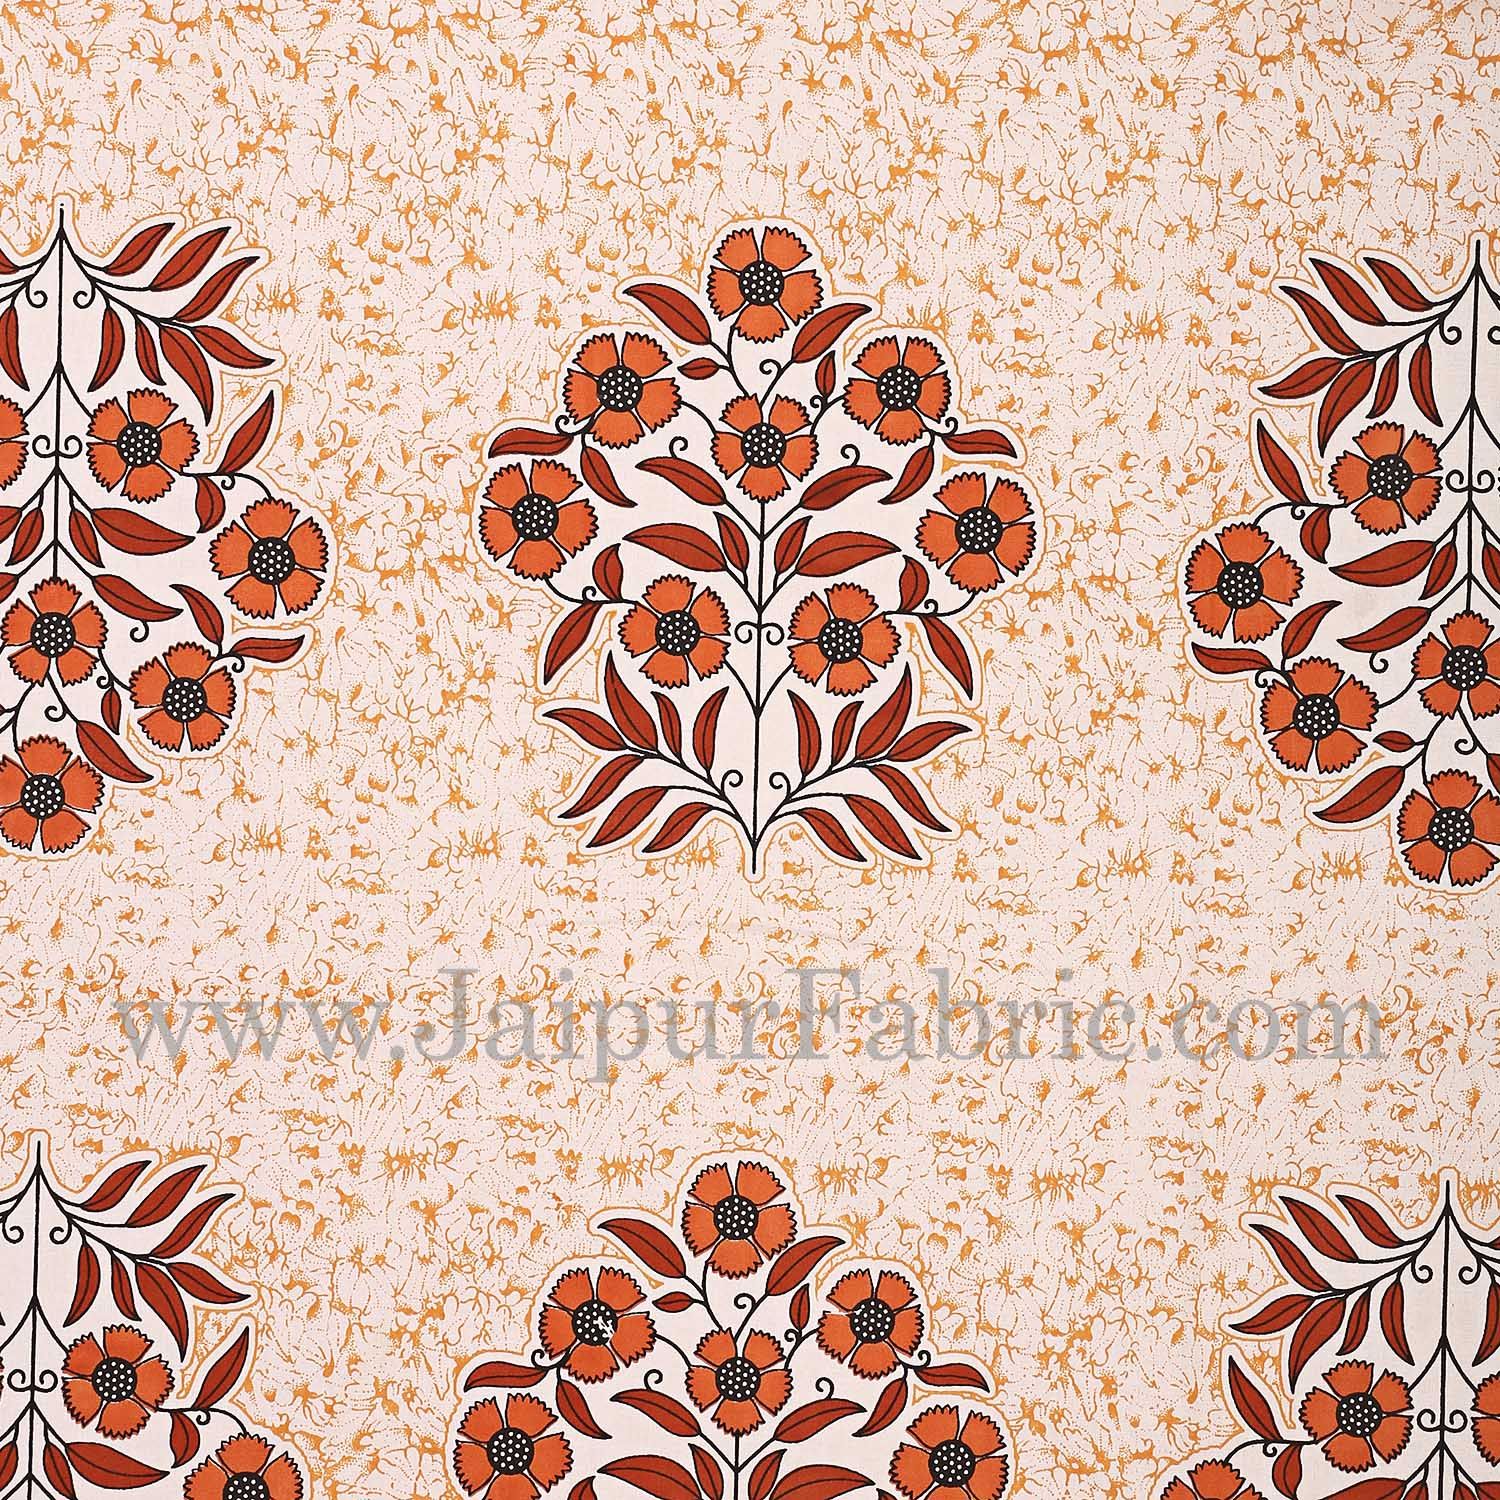 Brown Border with long paan print cotton double bedsheet